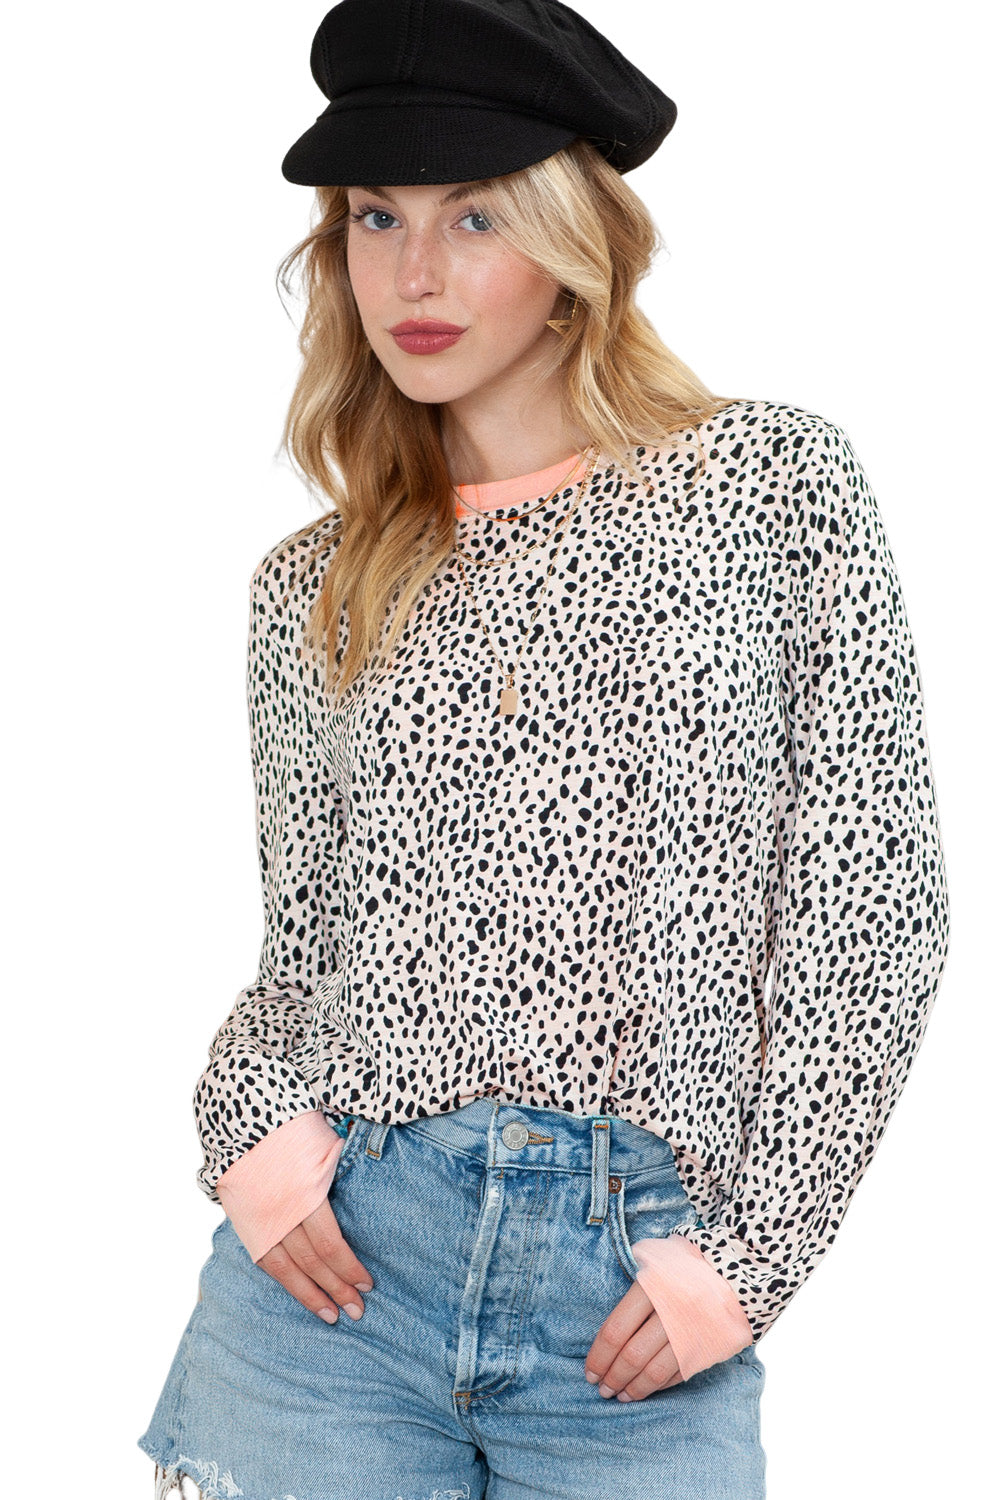 The Spotted Long Sleeve Top